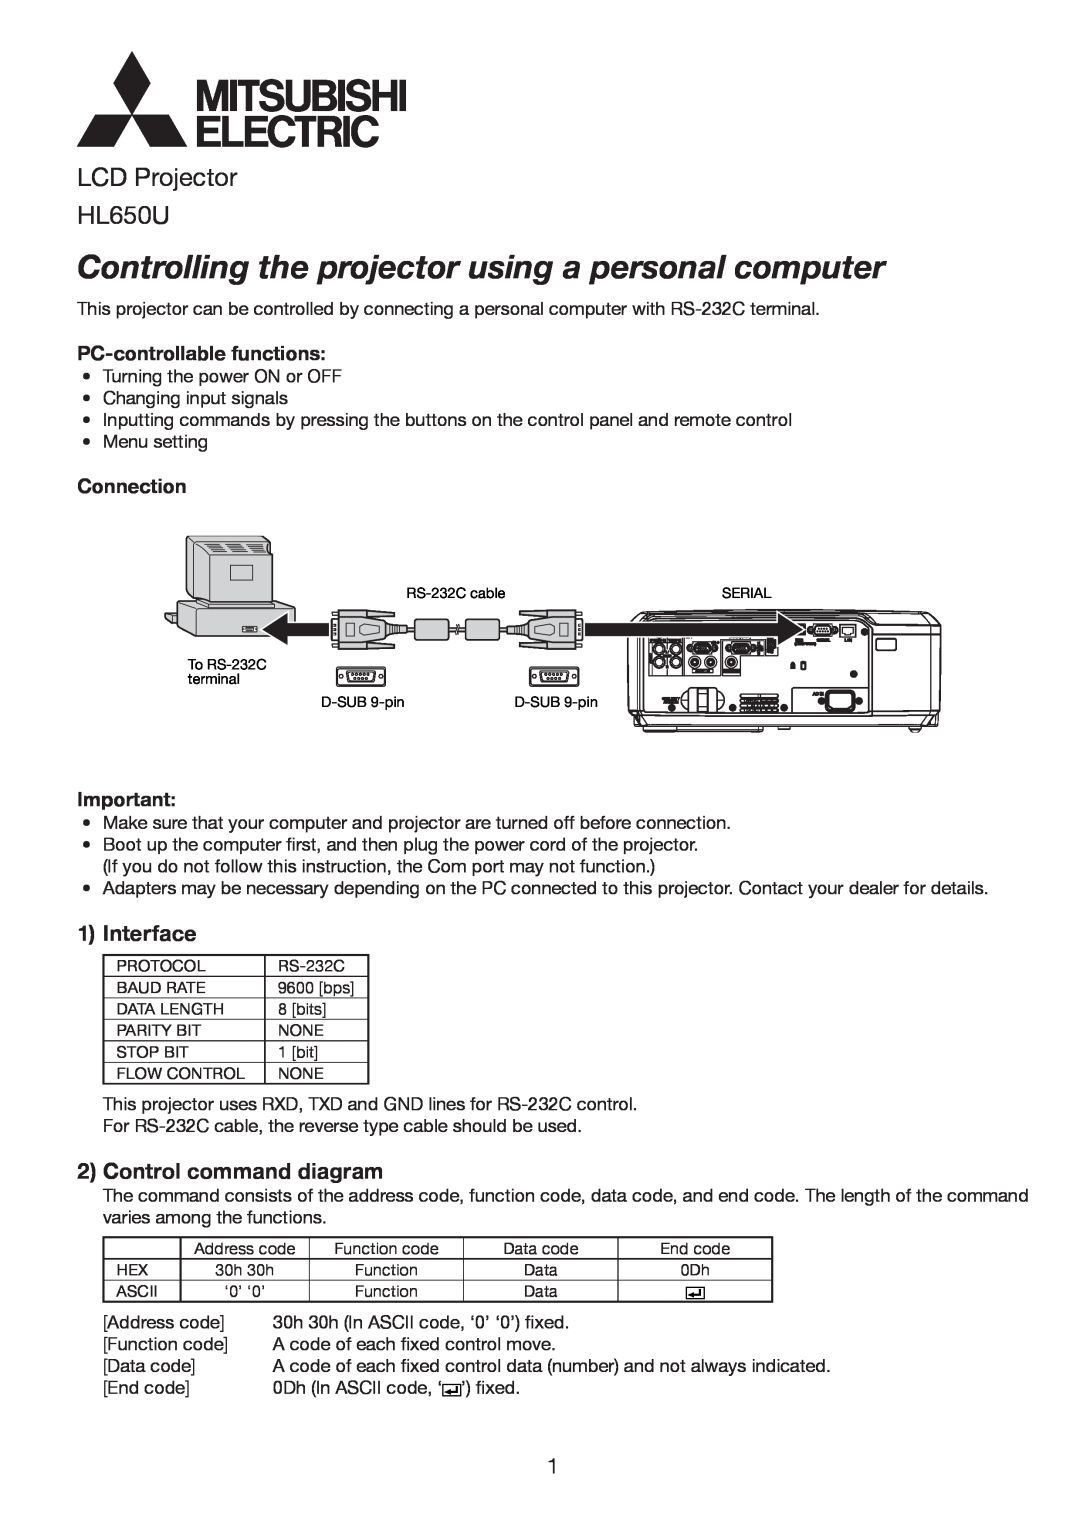 Mitsubishi Electronics HL650U manual Interface, Control command diagram, PC-controllable functions, Connection 